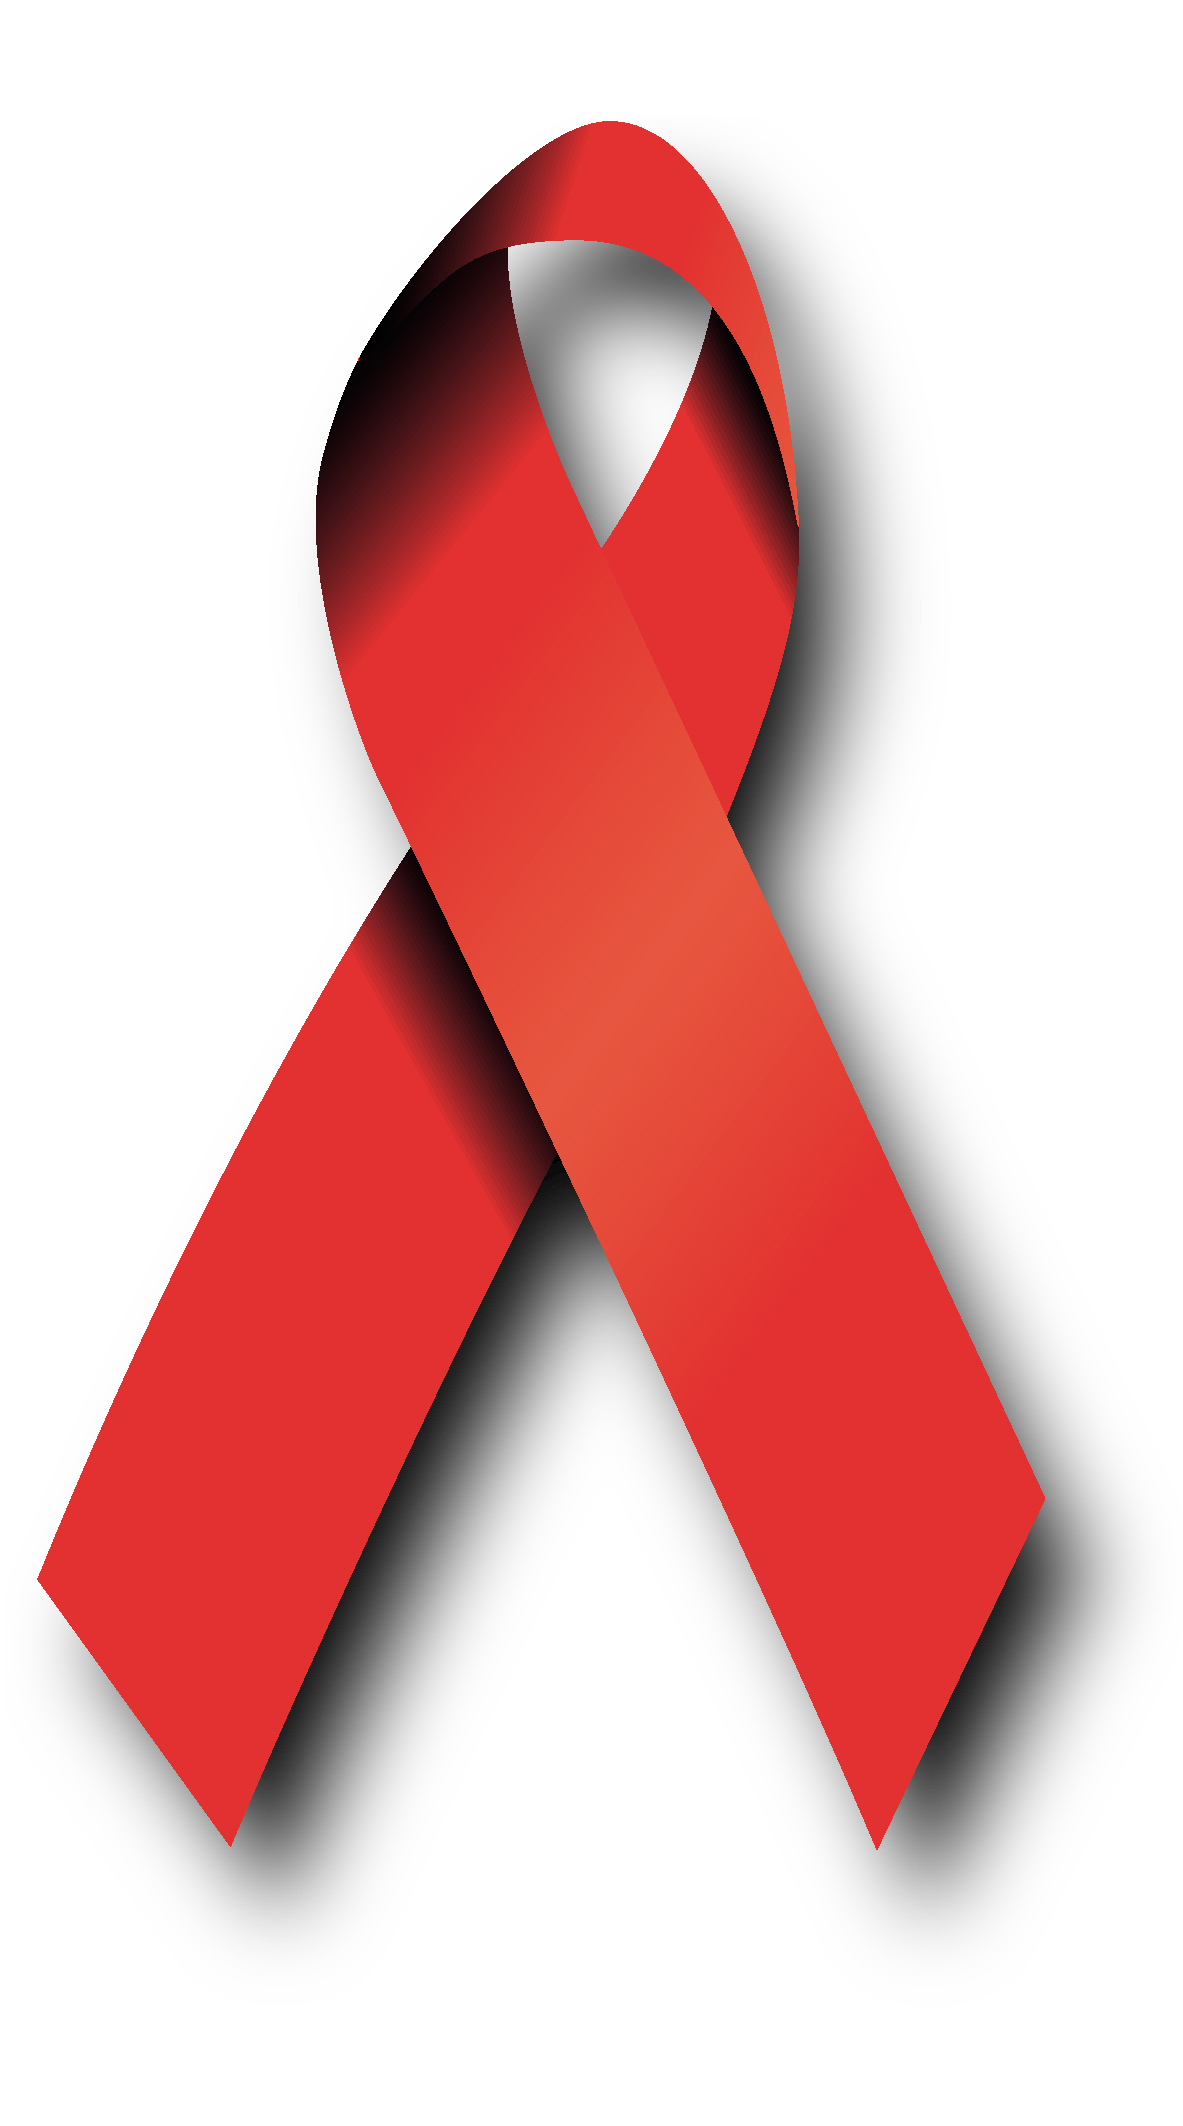 The Red Ribbon: A Universal Symbol of Hope for HIV Poz Folks